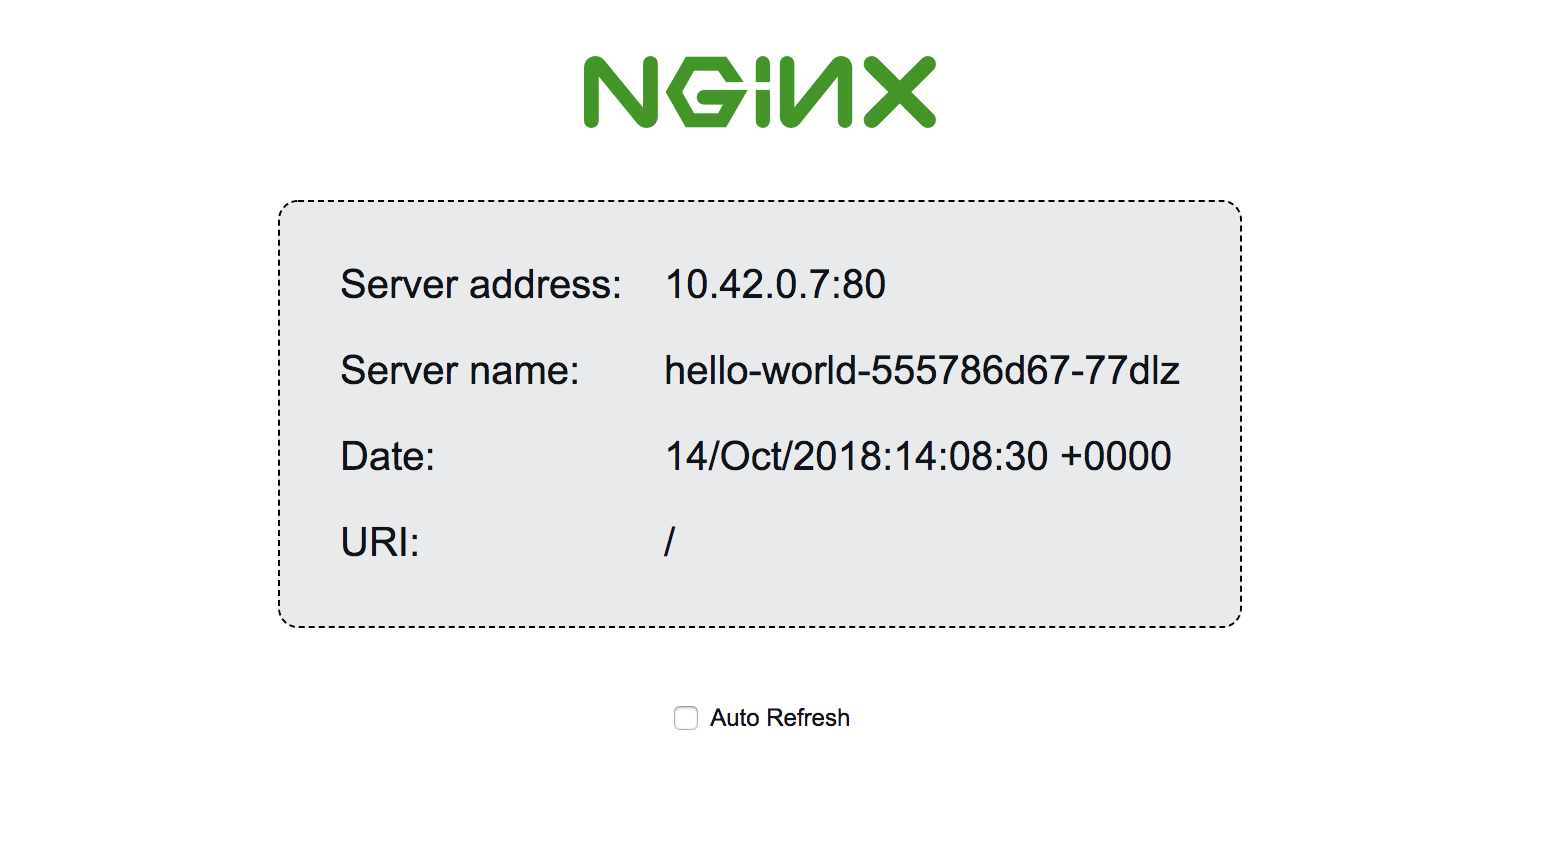 Server address, Server name, and other output from the running NGINX container